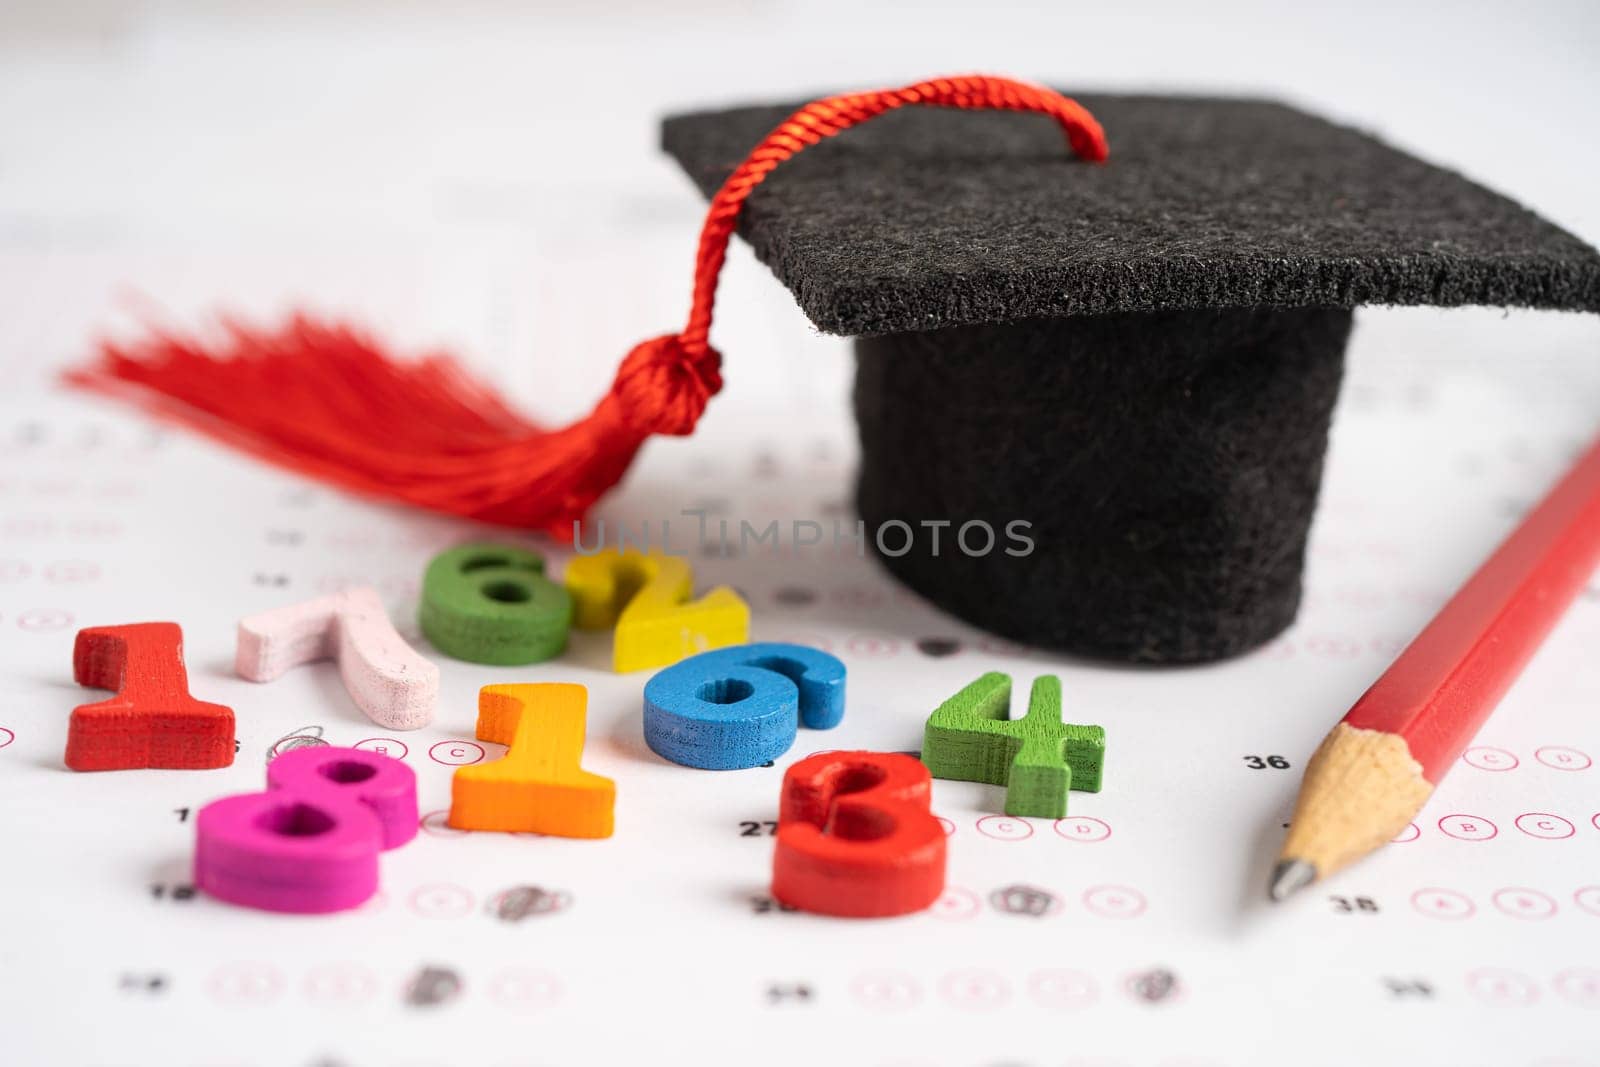 Graduation gap hat and pencil on answer sheet paper, Education study testing learning teach concept. by pamai